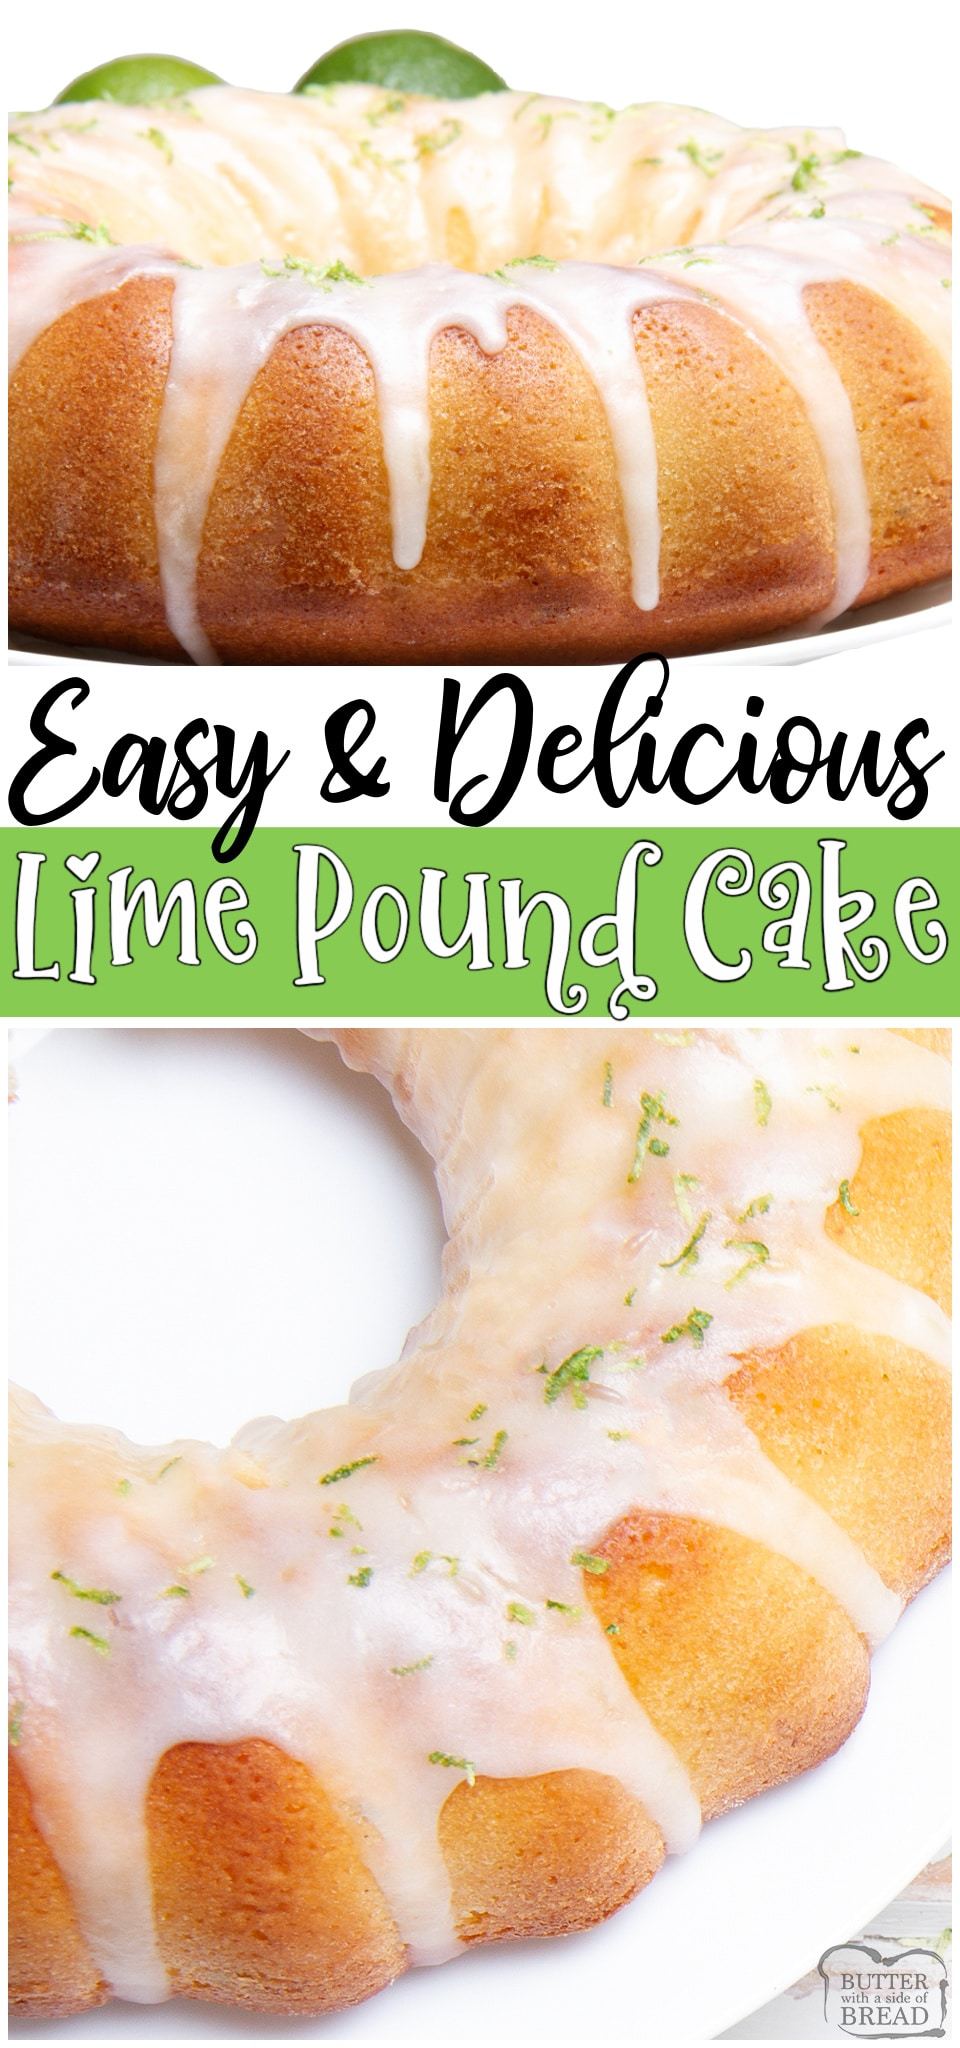 Buttery Lime Pound Cake recipe made with classic ingredients for a sweet & tangy lime dessert. Delicious pound cake with a bright, fresh lime flavor that everyone enjoys! #lime #poundcake #cake #butter #baking #dessert #easyrecipe from BUTTER WITH A SIDE OF BREAD